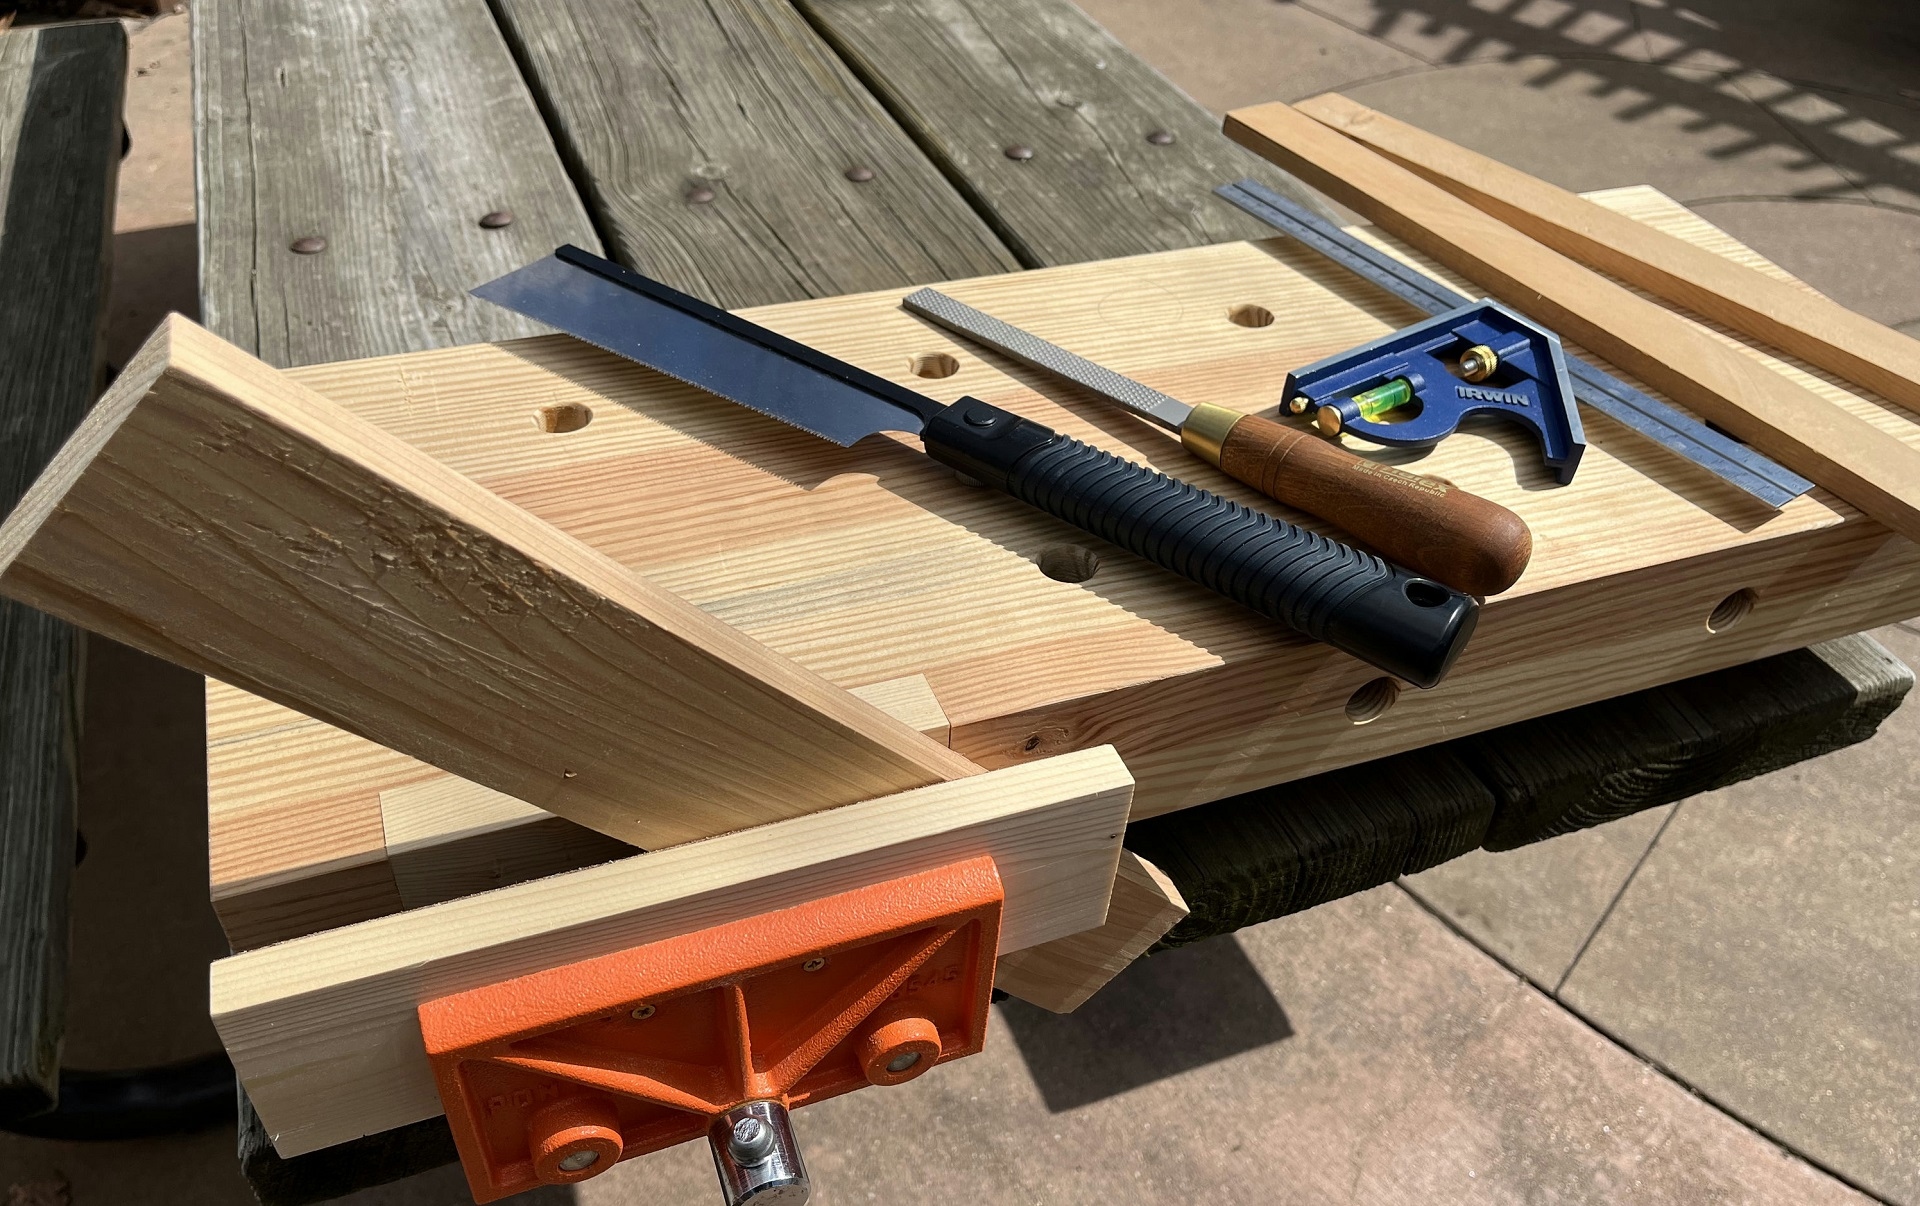 Photograph of woodworking tools laid lout on a wooden bench